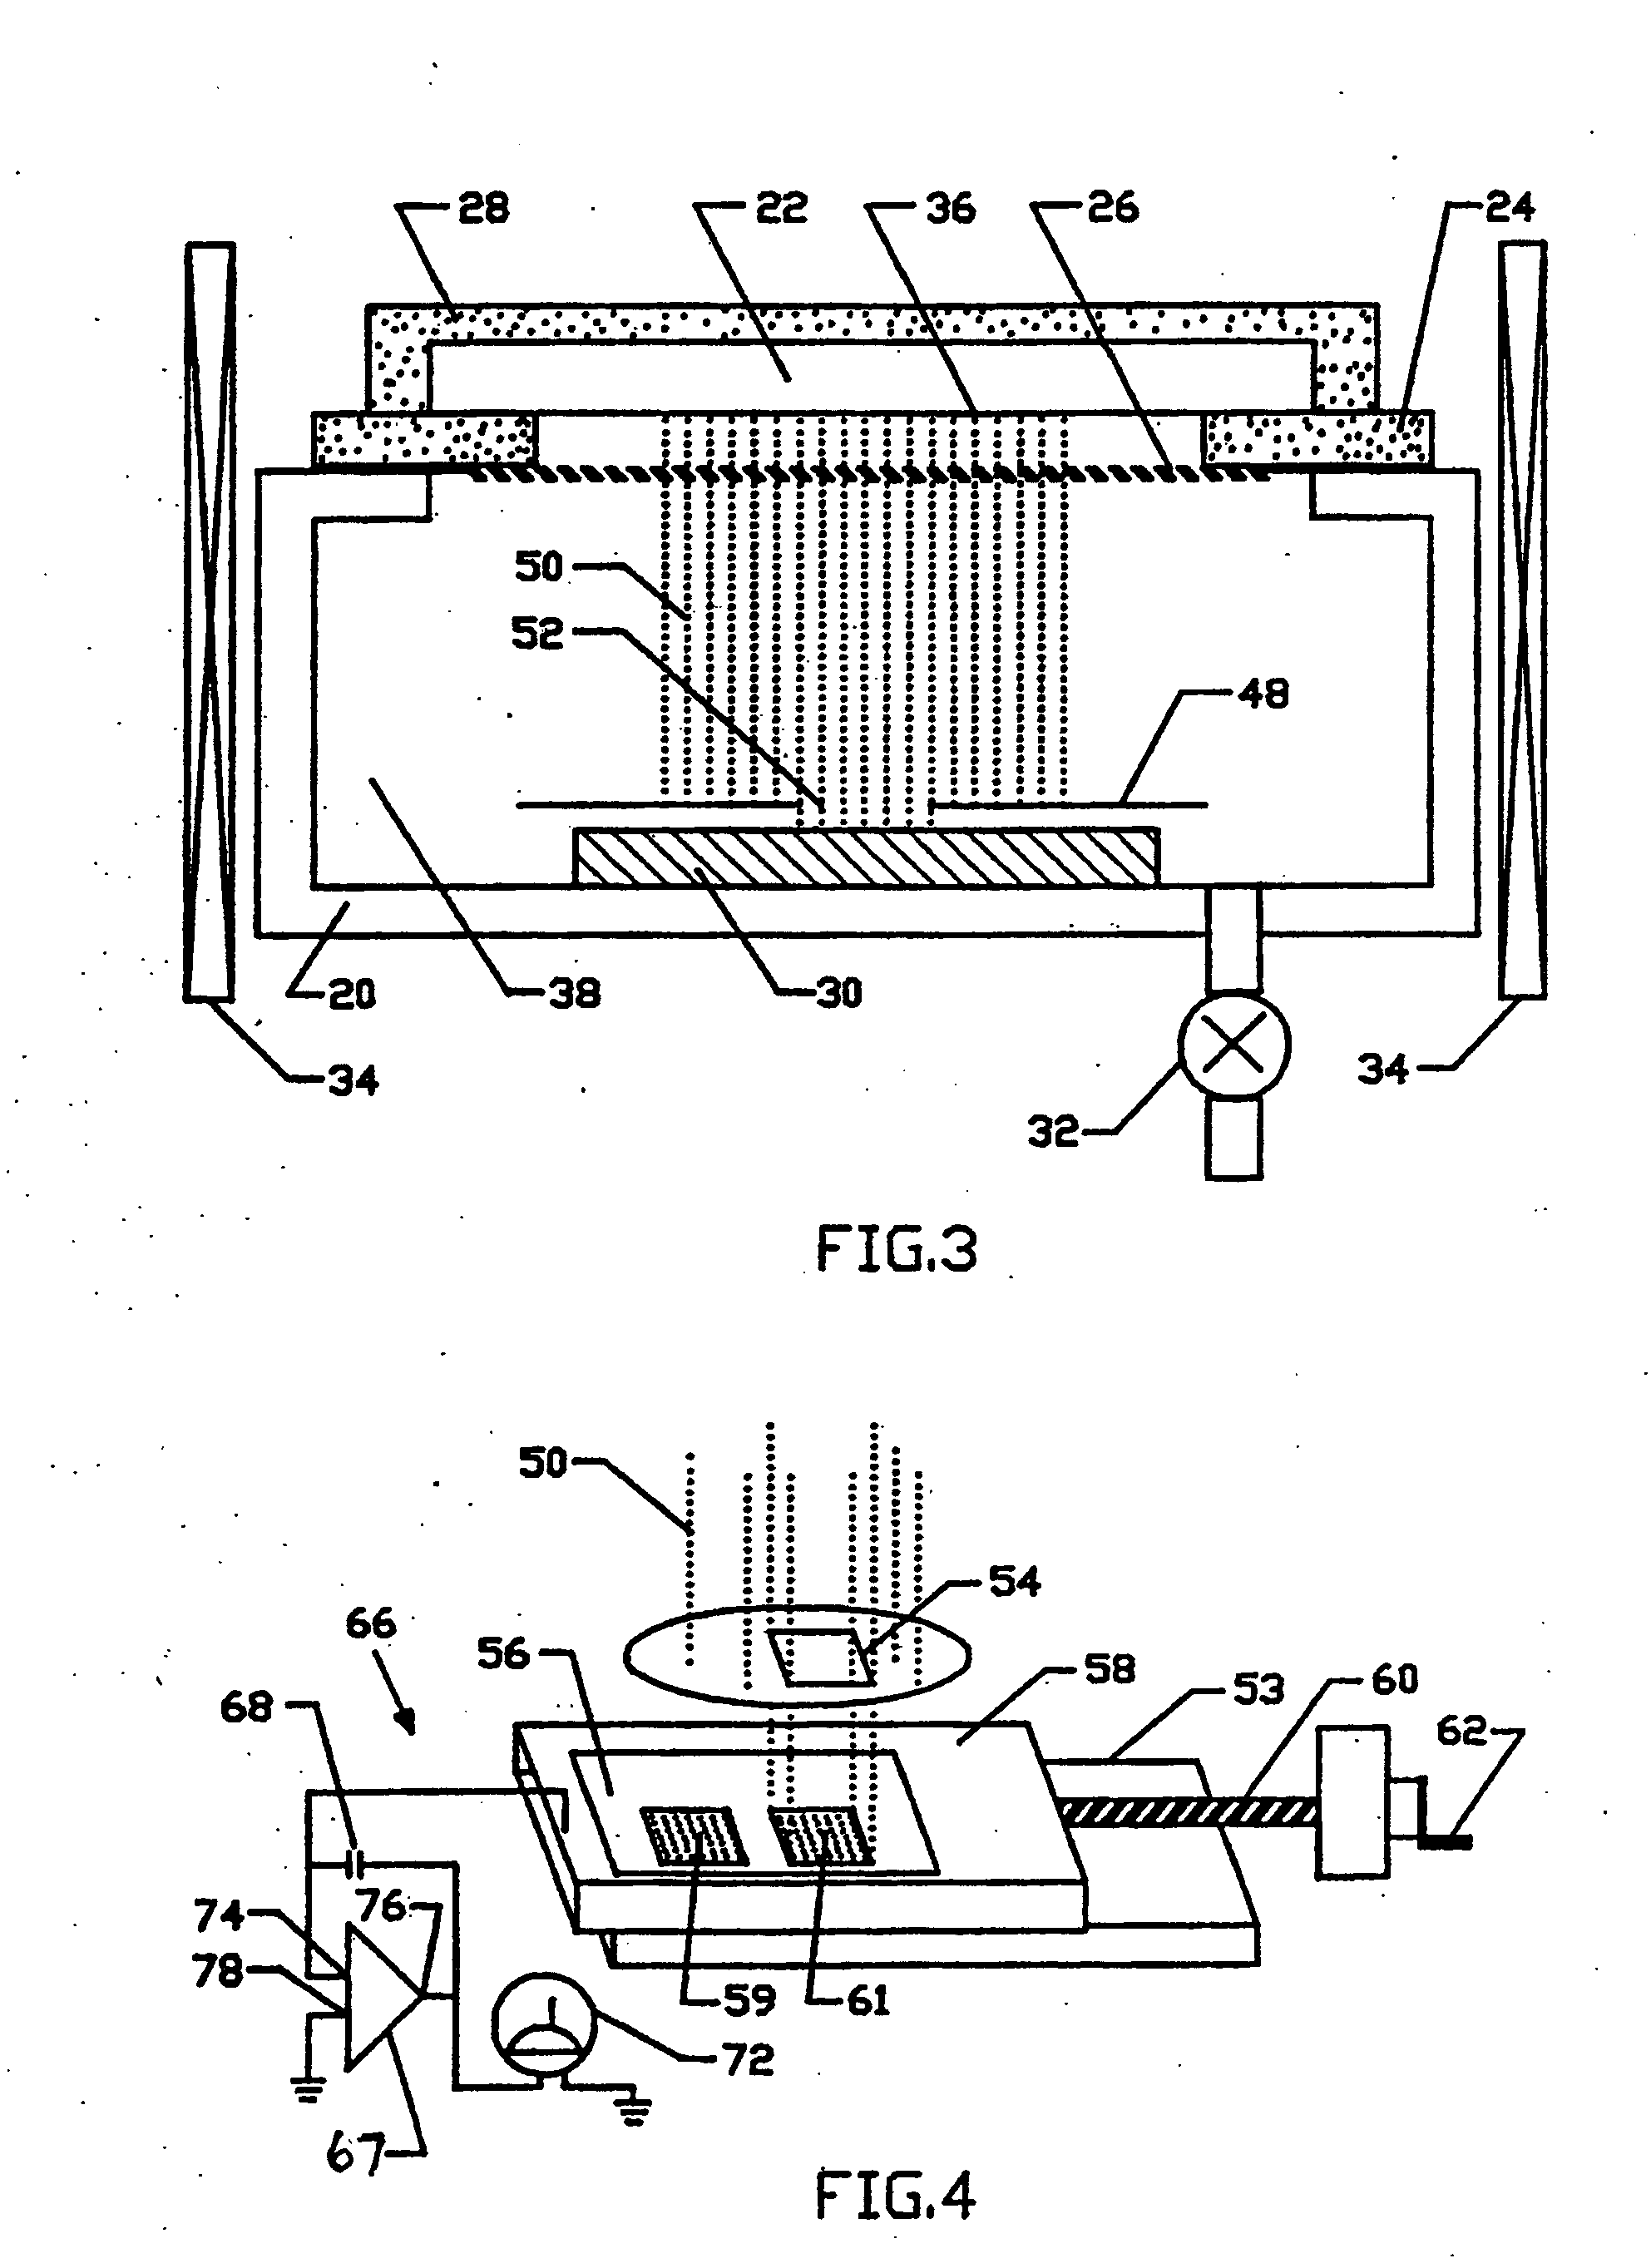 Method and apparatus for reducing charge density on a dielectric coated substrate after exposure to large area electron beam